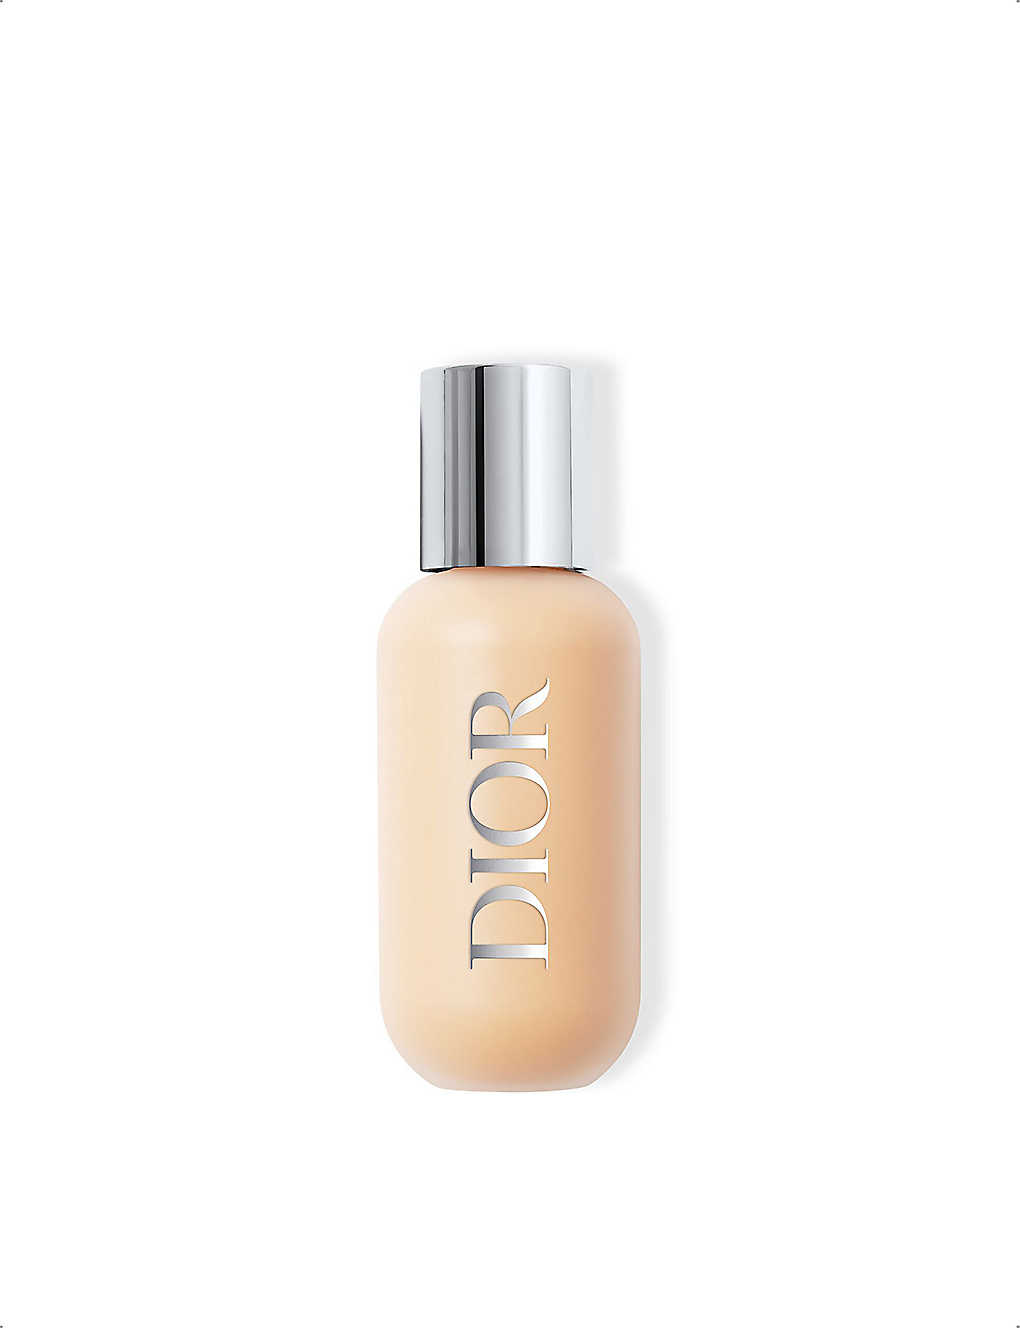 Dior Backstage Face & Body Foundation 50ml In 2w